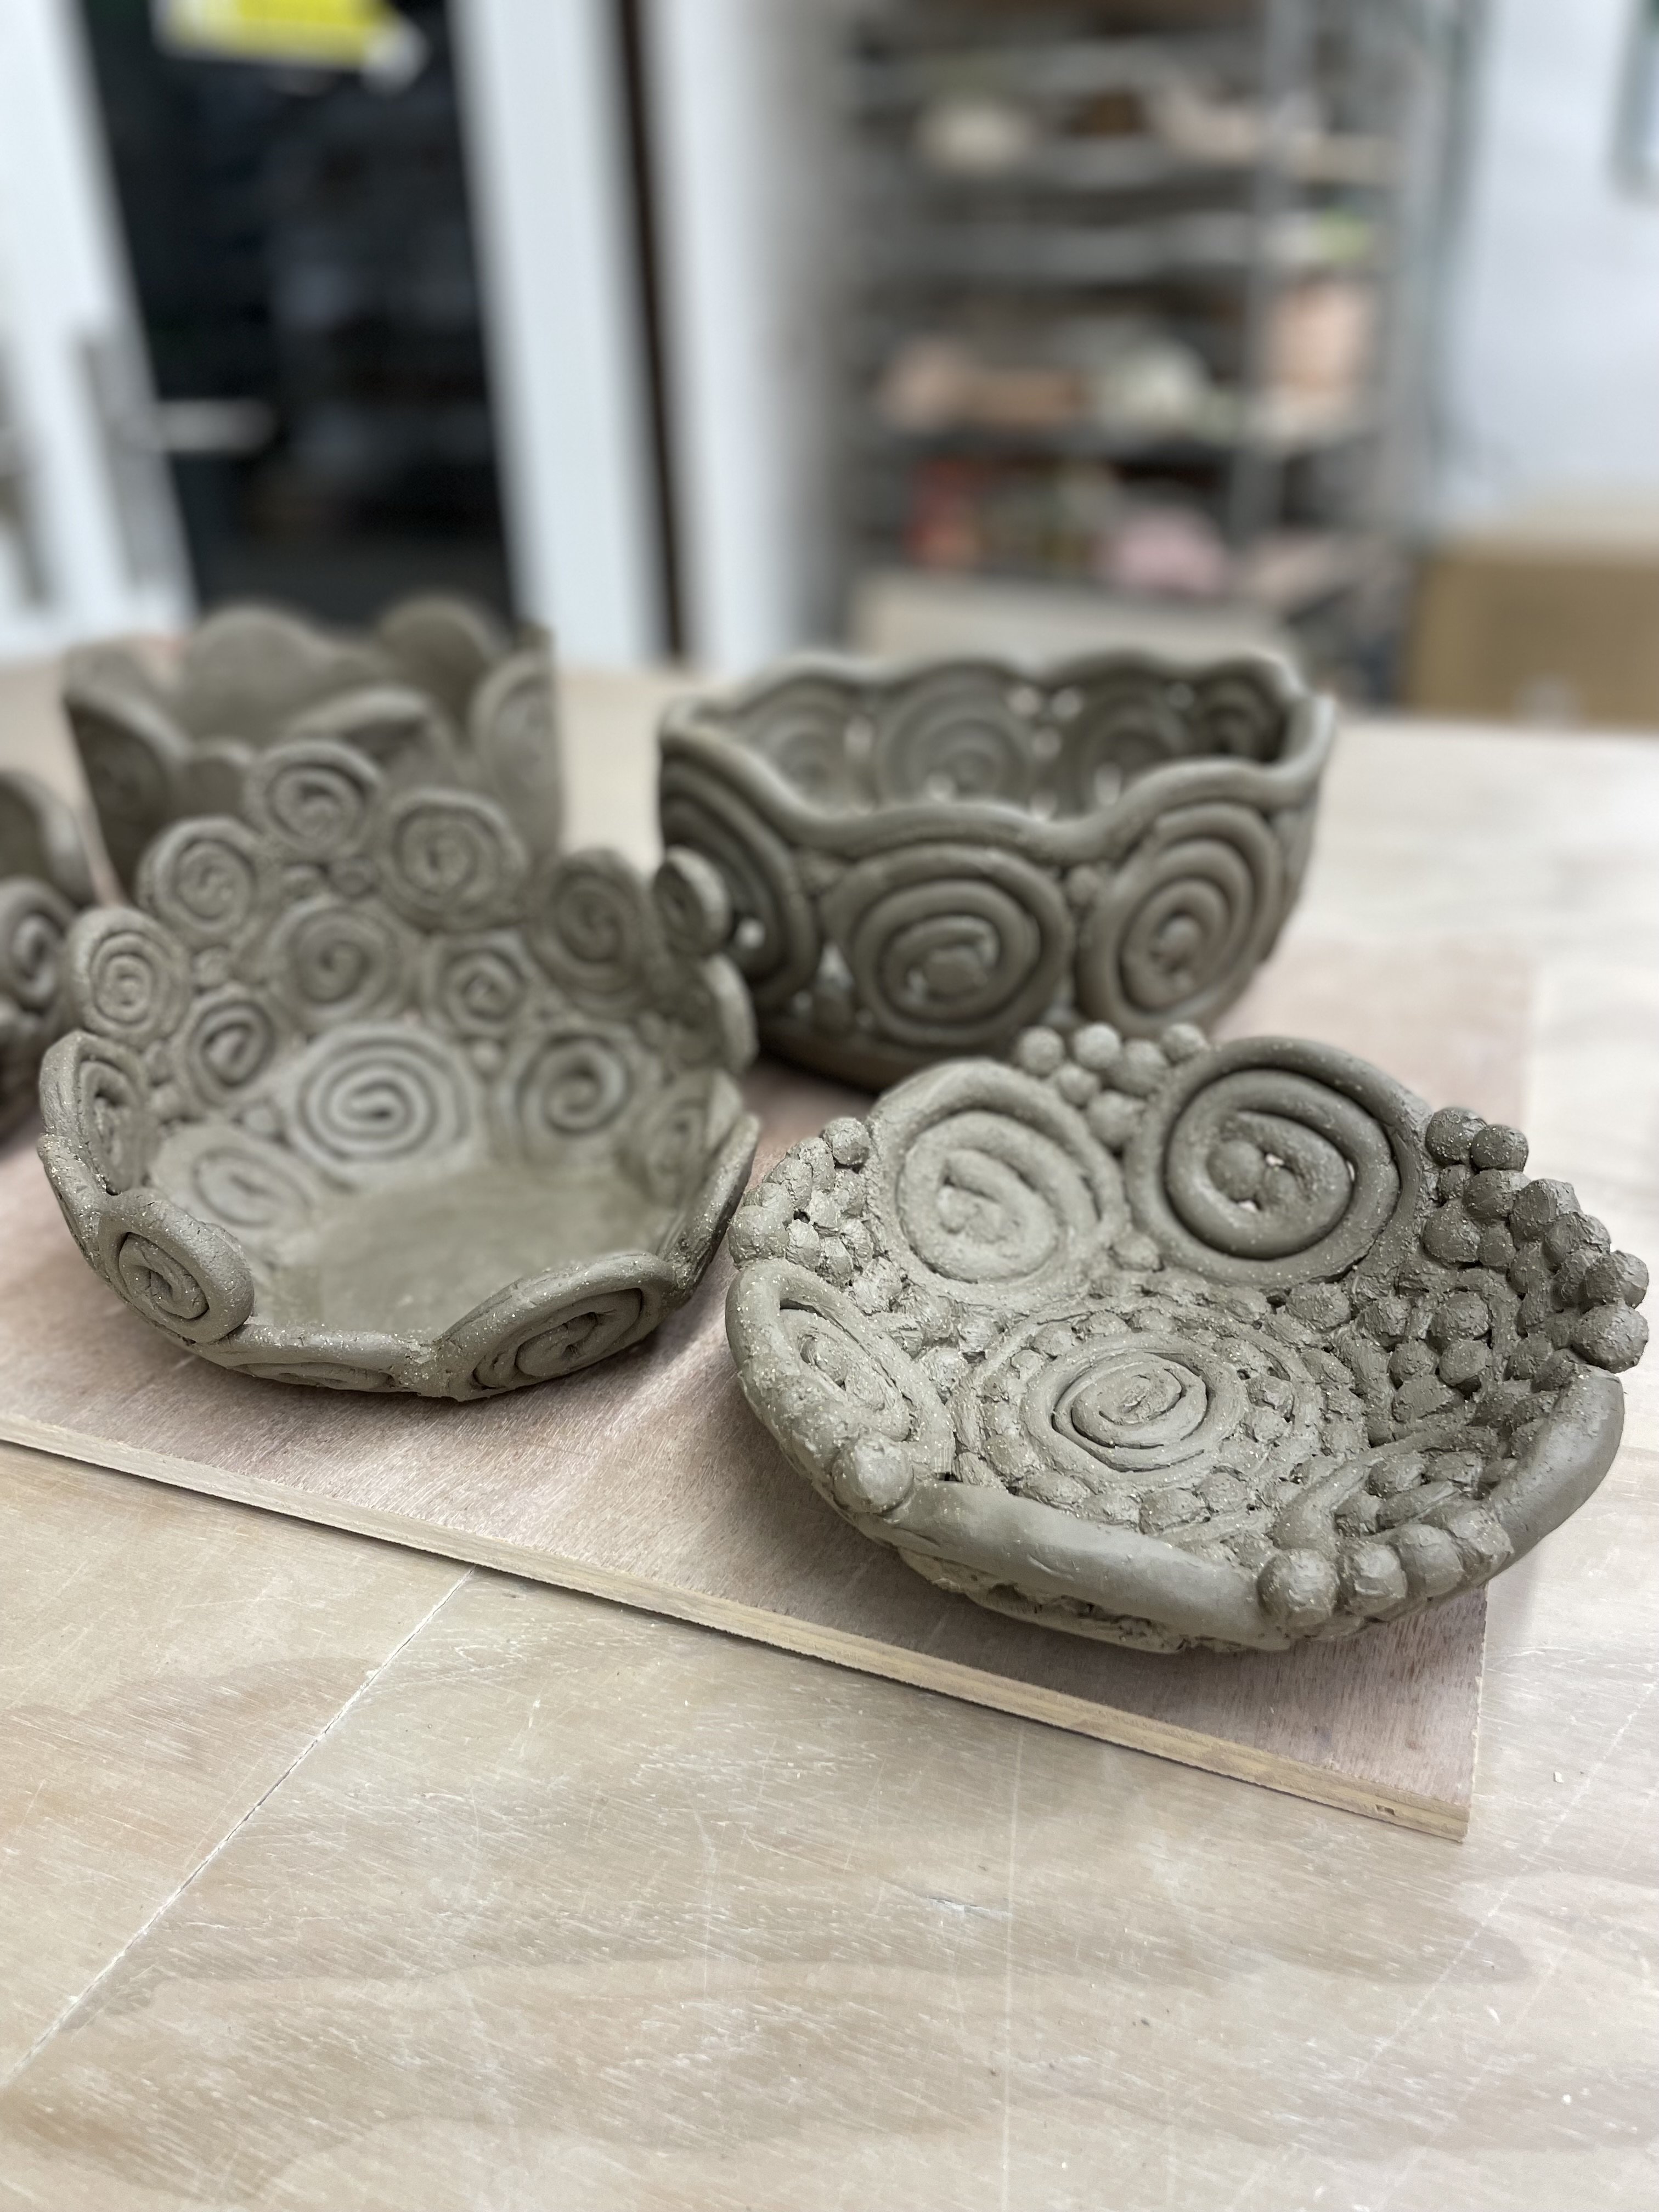 Improvers 6 week Pottery Course